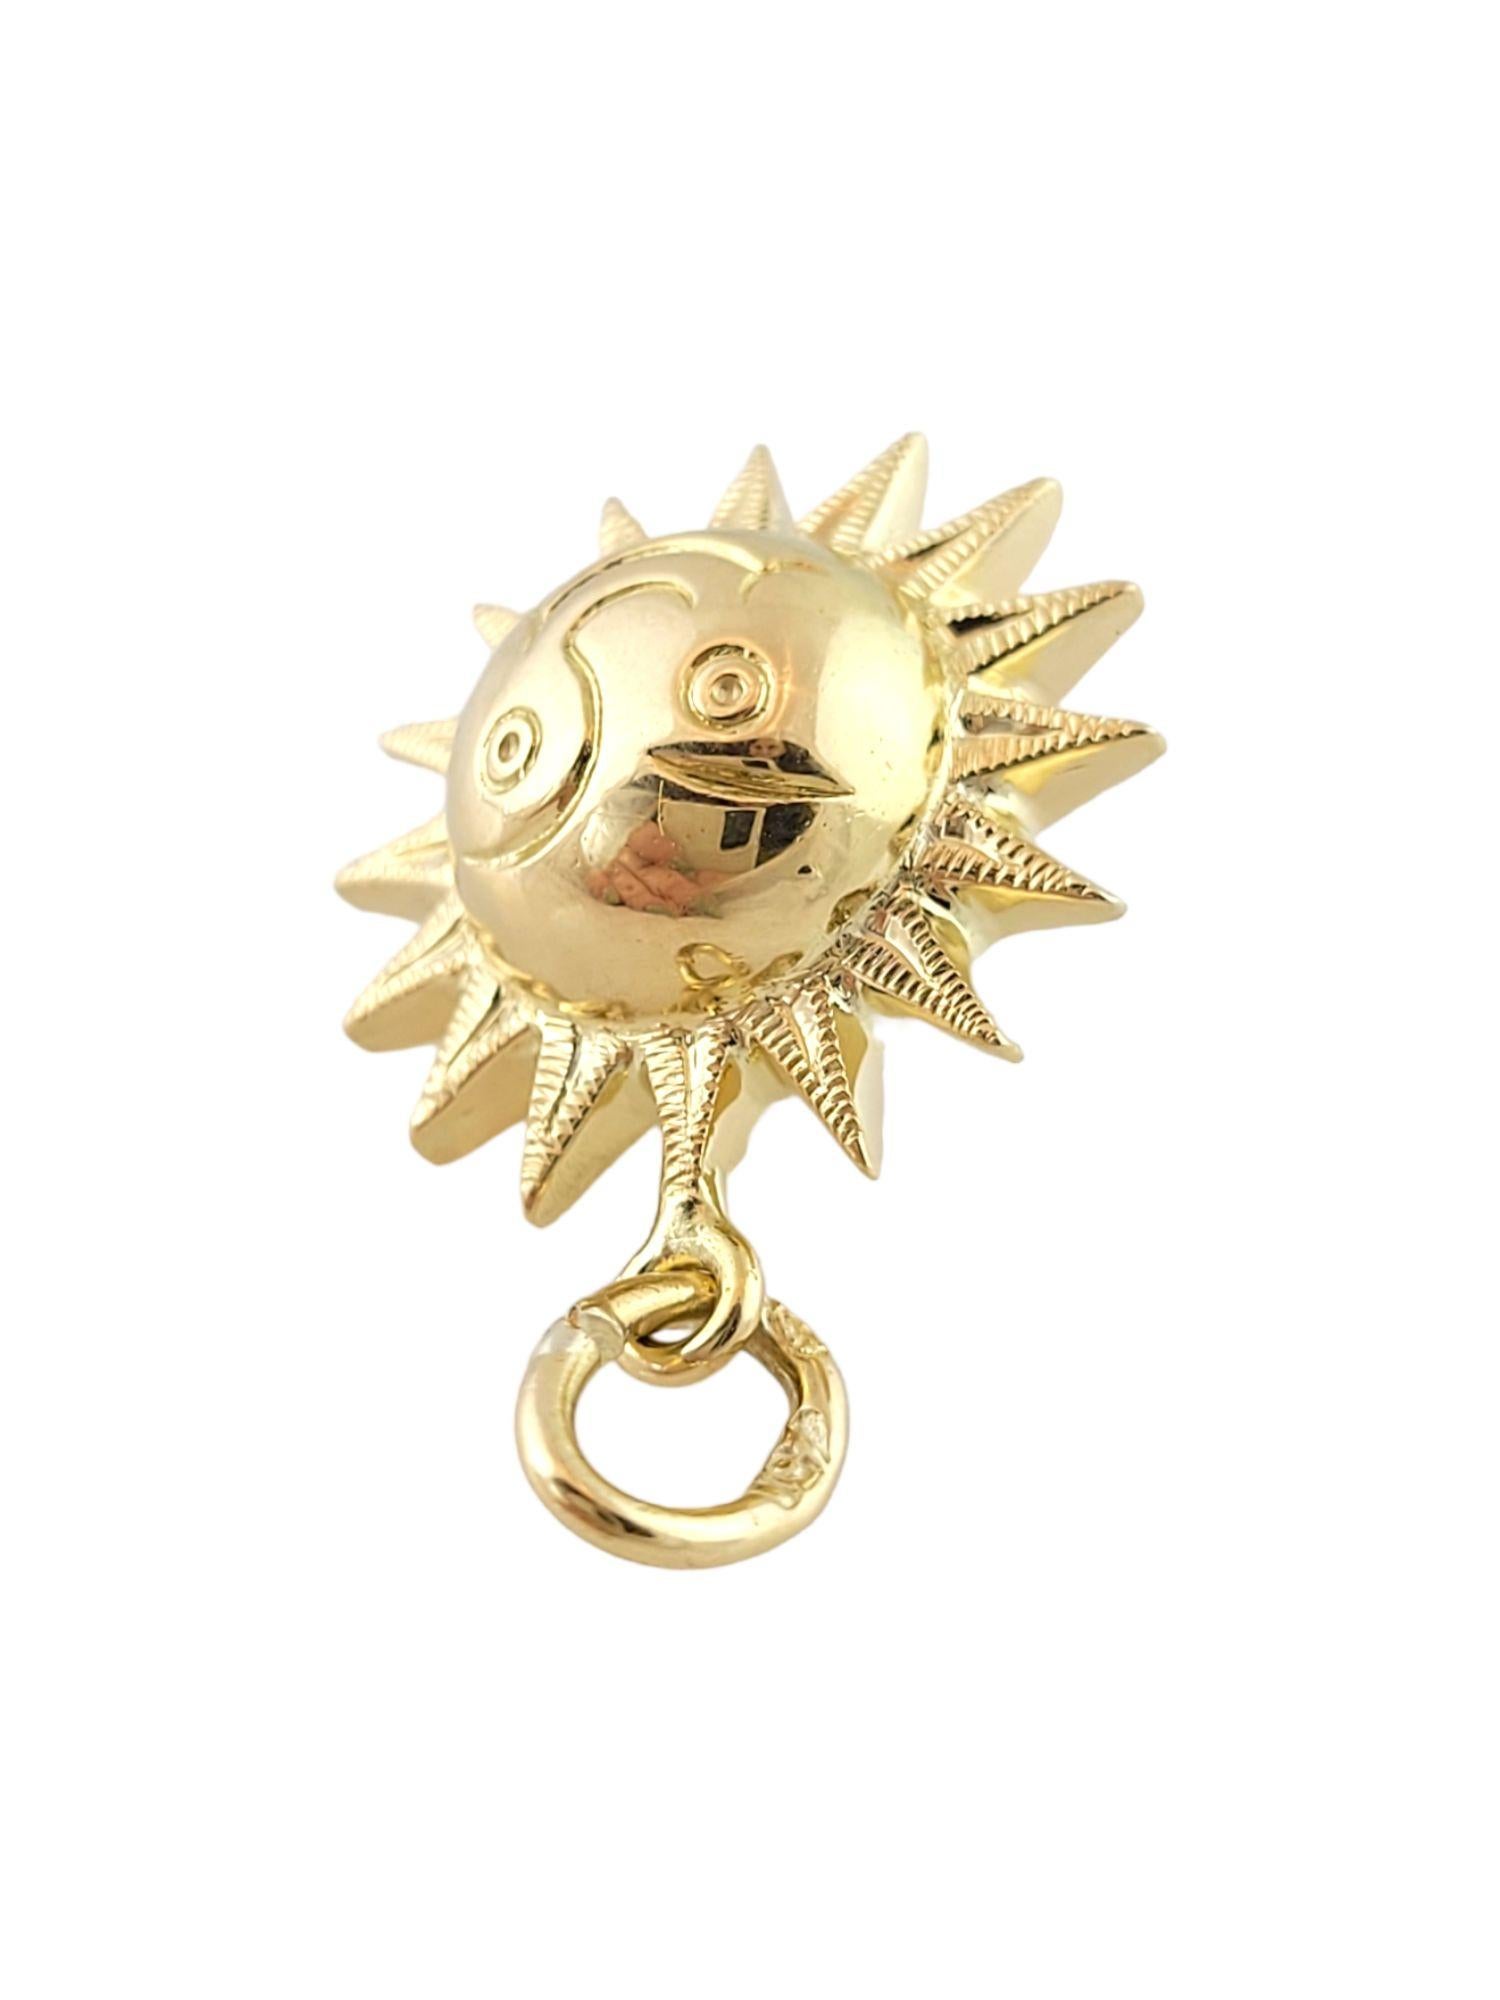 Vintage 18K Yellow Gold Sun Charm

This adorable 18K gold sun charm is sure to brighten your day!

Size: 20.5mm X 17.5mm X 10.5mm
Length w/ bail: 26.5mm

Weight: 3.7 g/ 2.3 dwt

Hallmark: 750

Very good condition, professionally polished.

Will come